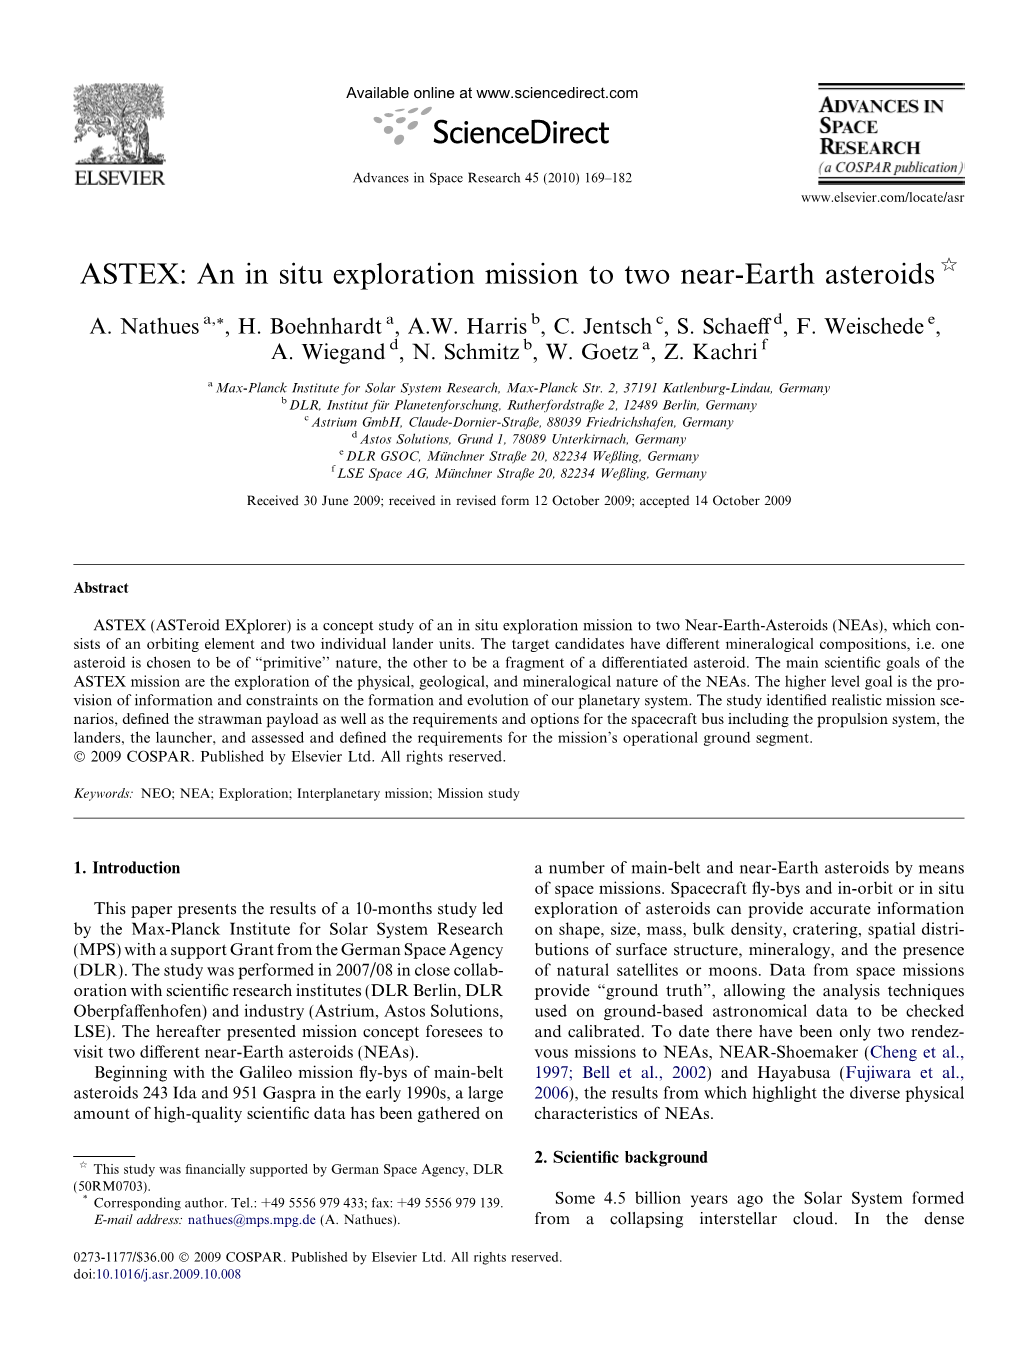 ASTEX: an in Situ Exploration Mission to Two Near-Earth Asteroids Q